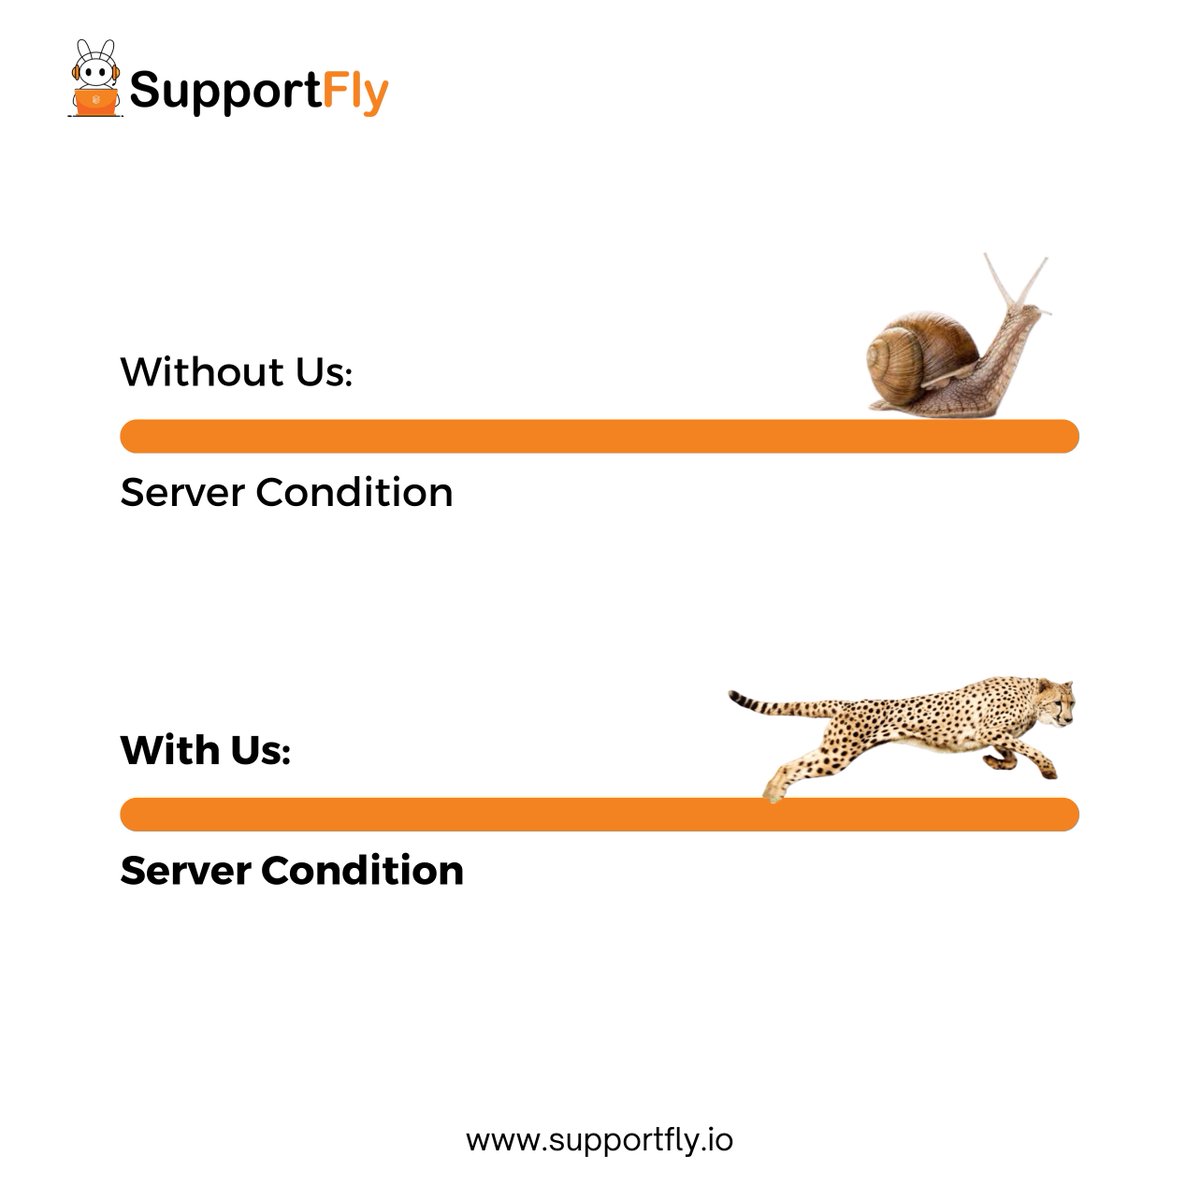 Don't let slow connections hold you back! Speed up with Supportfly and experience lightning-fast service connections.
#server #serversupport #dedicatedserver #cloudserver #windossupport #linuxsupport #servermanagement #serversolution #serverprovider #serversolutions #supportfly